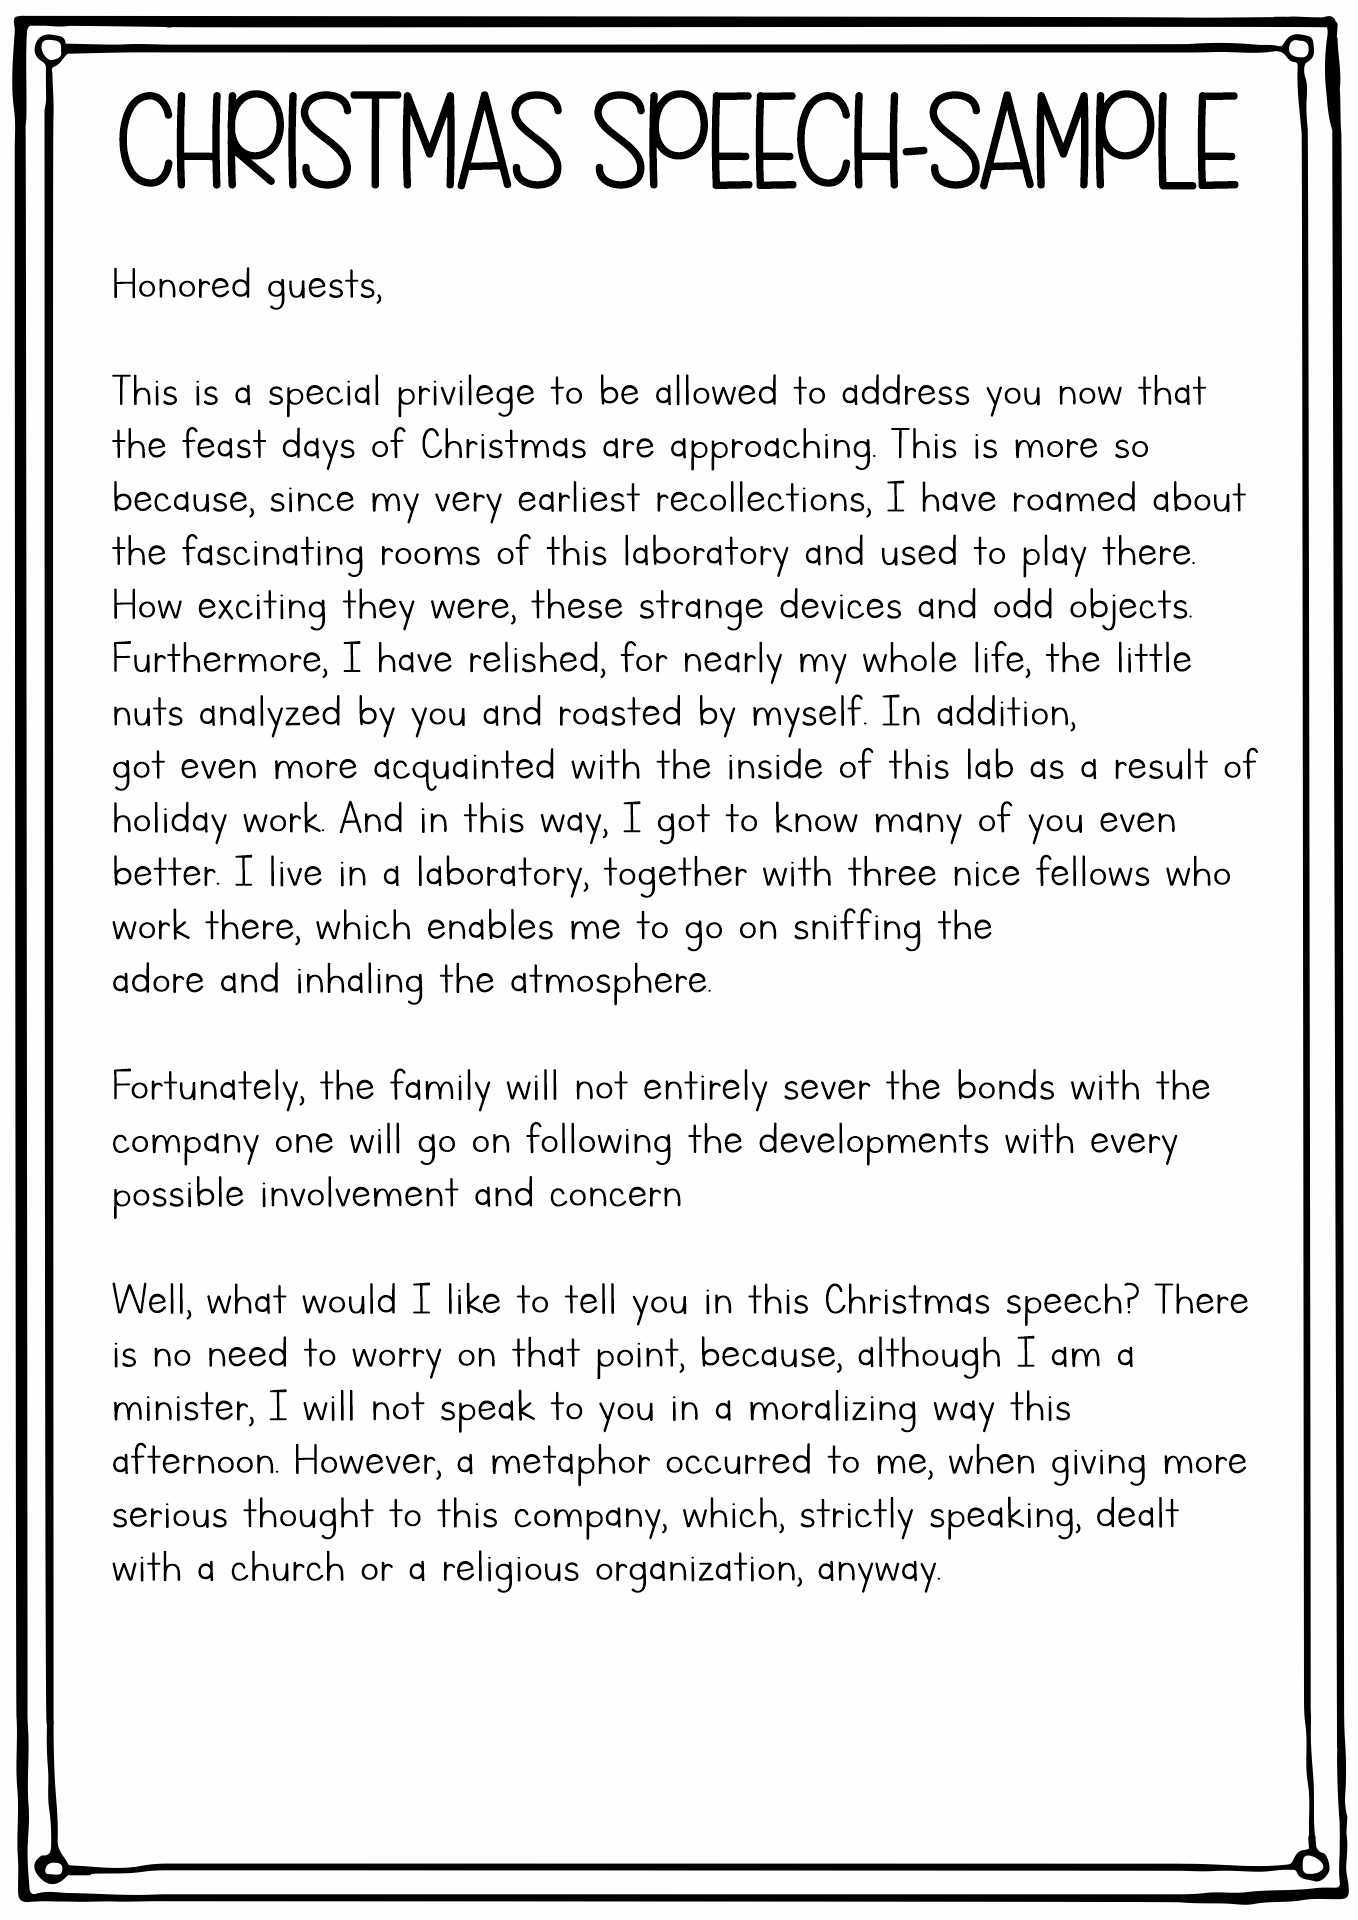 Christmas Welcome Speeches Sample Image